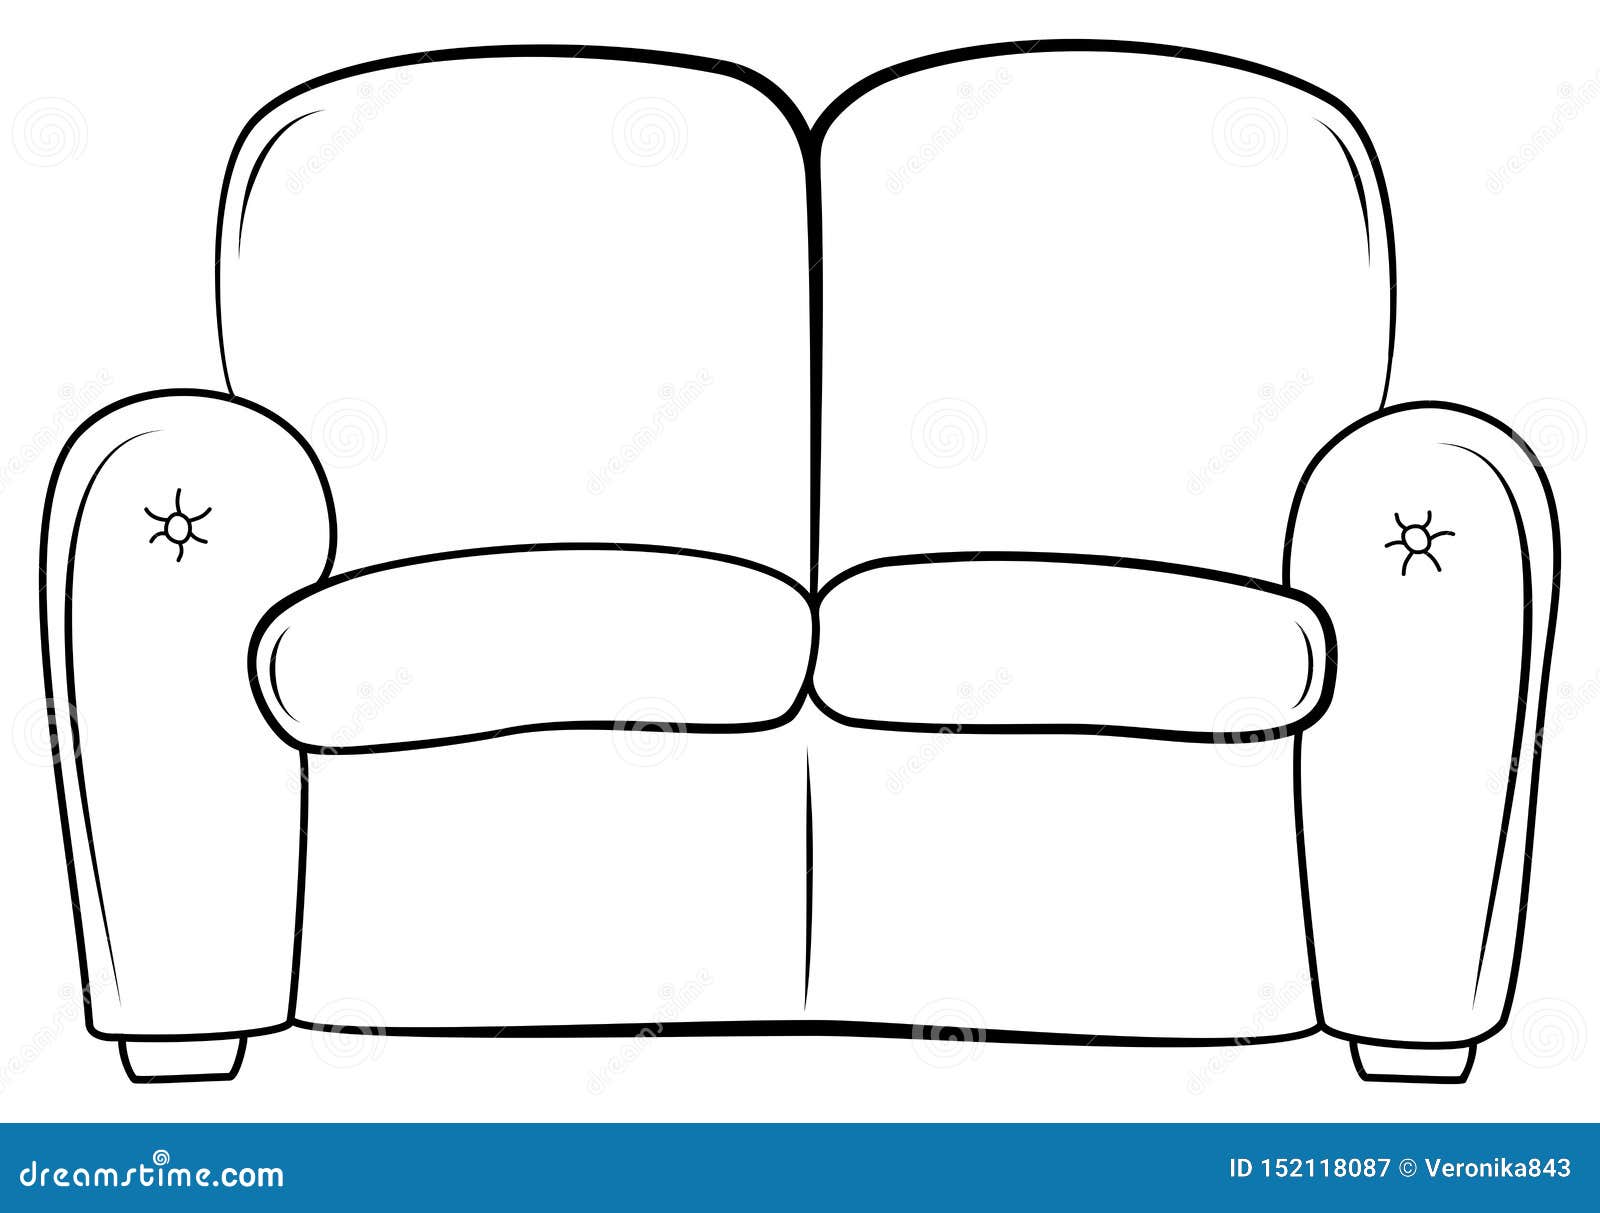 couch clipart black and white